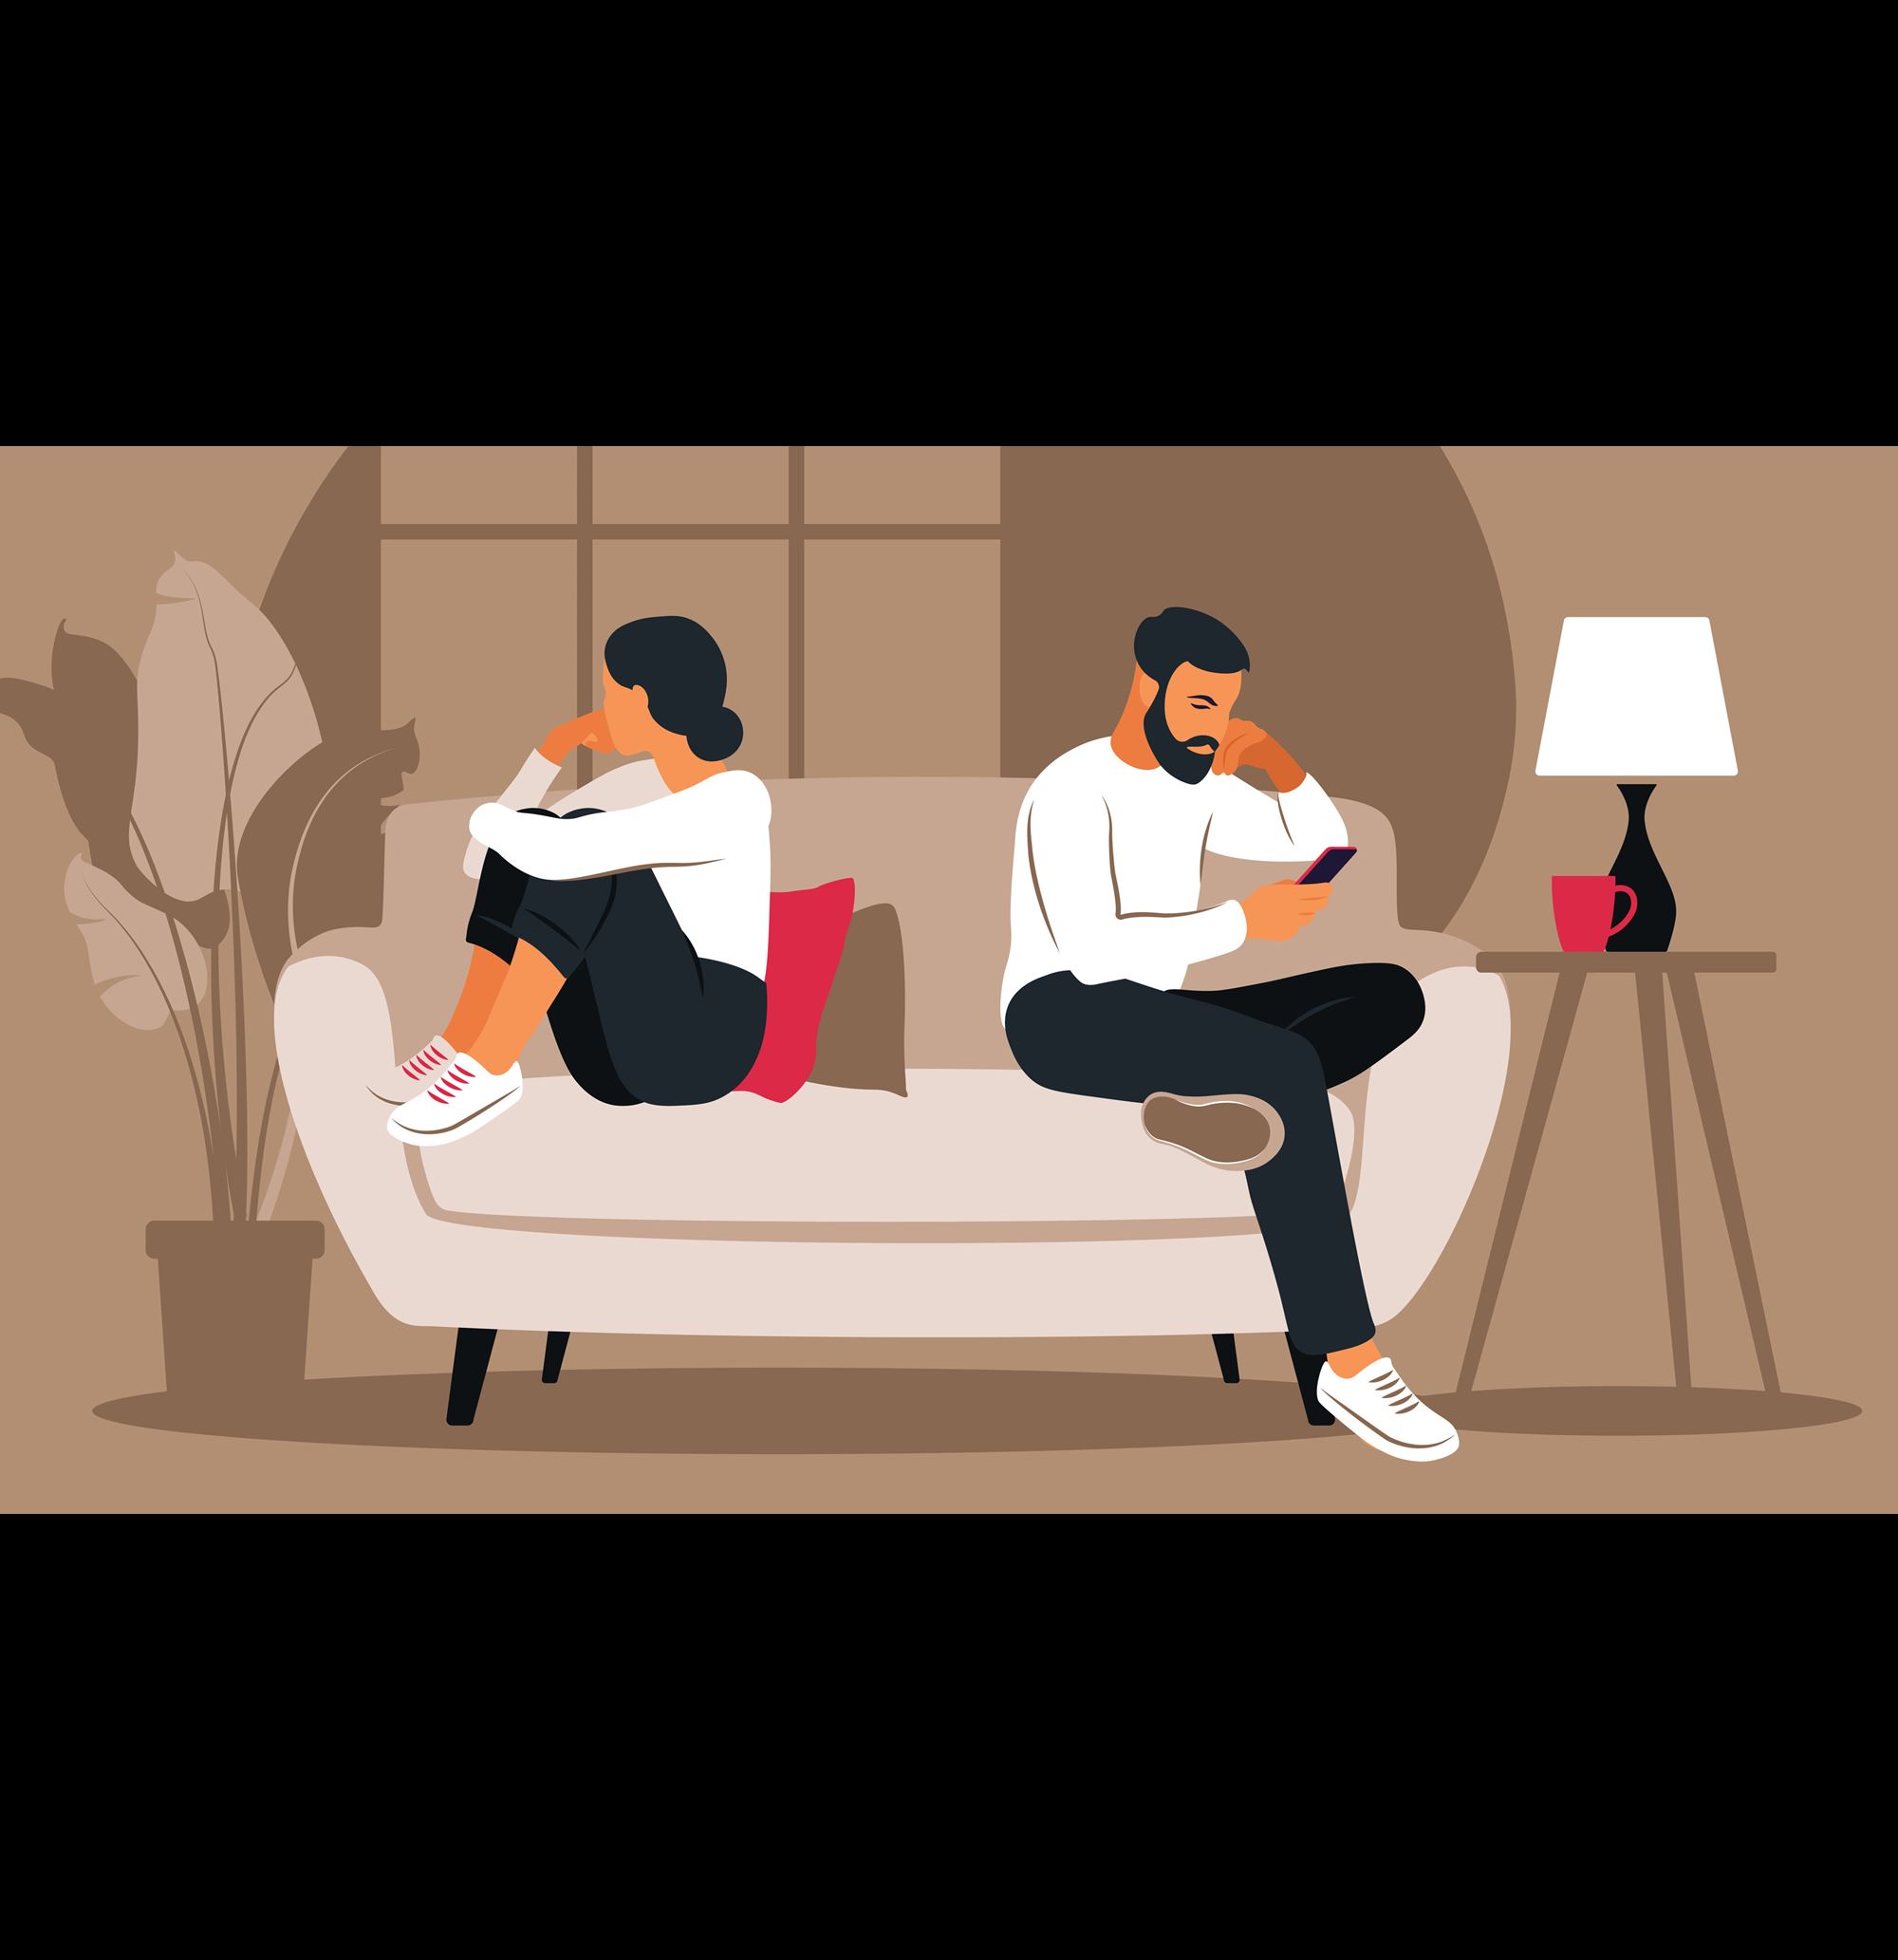 couple on couch illustration 16x9